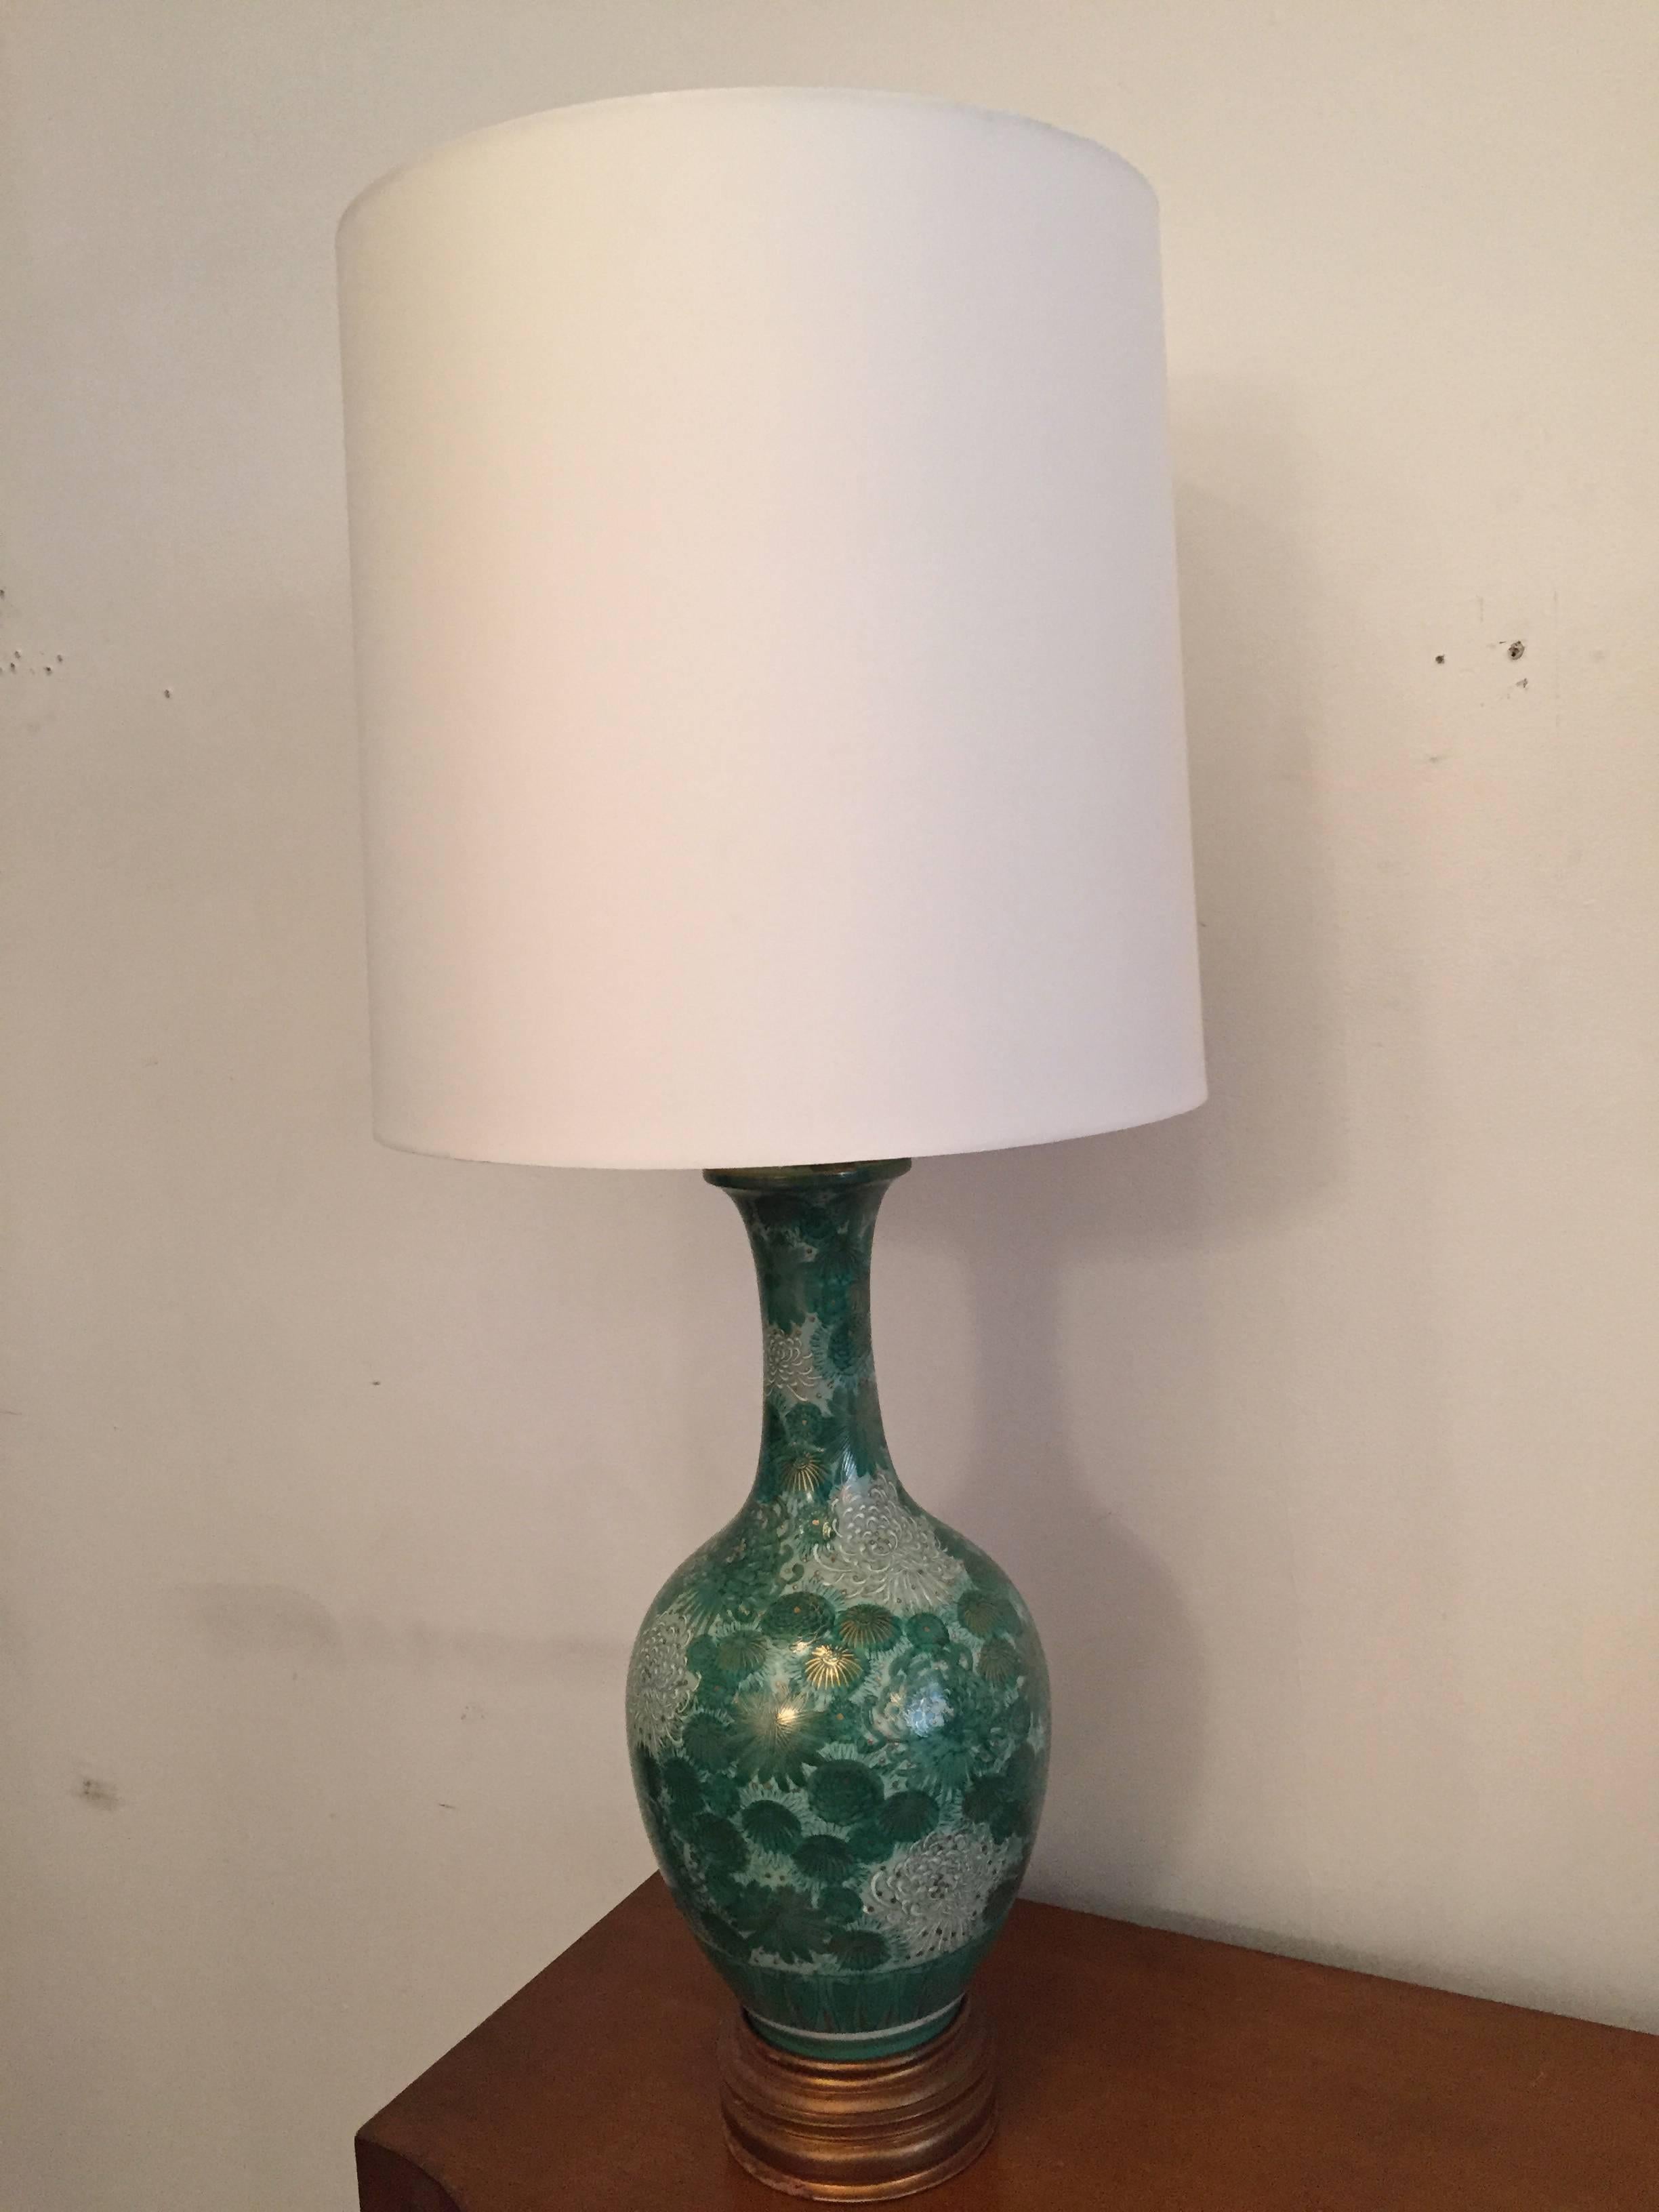 A rich, elegant pair of 1950s American table lamps composed of hand-painted Japanese Moriage vases with giltwood bases. The ceramic bodies are composed hand-painted in a floral pattern colors of green and white. Newly rewired. Original label.